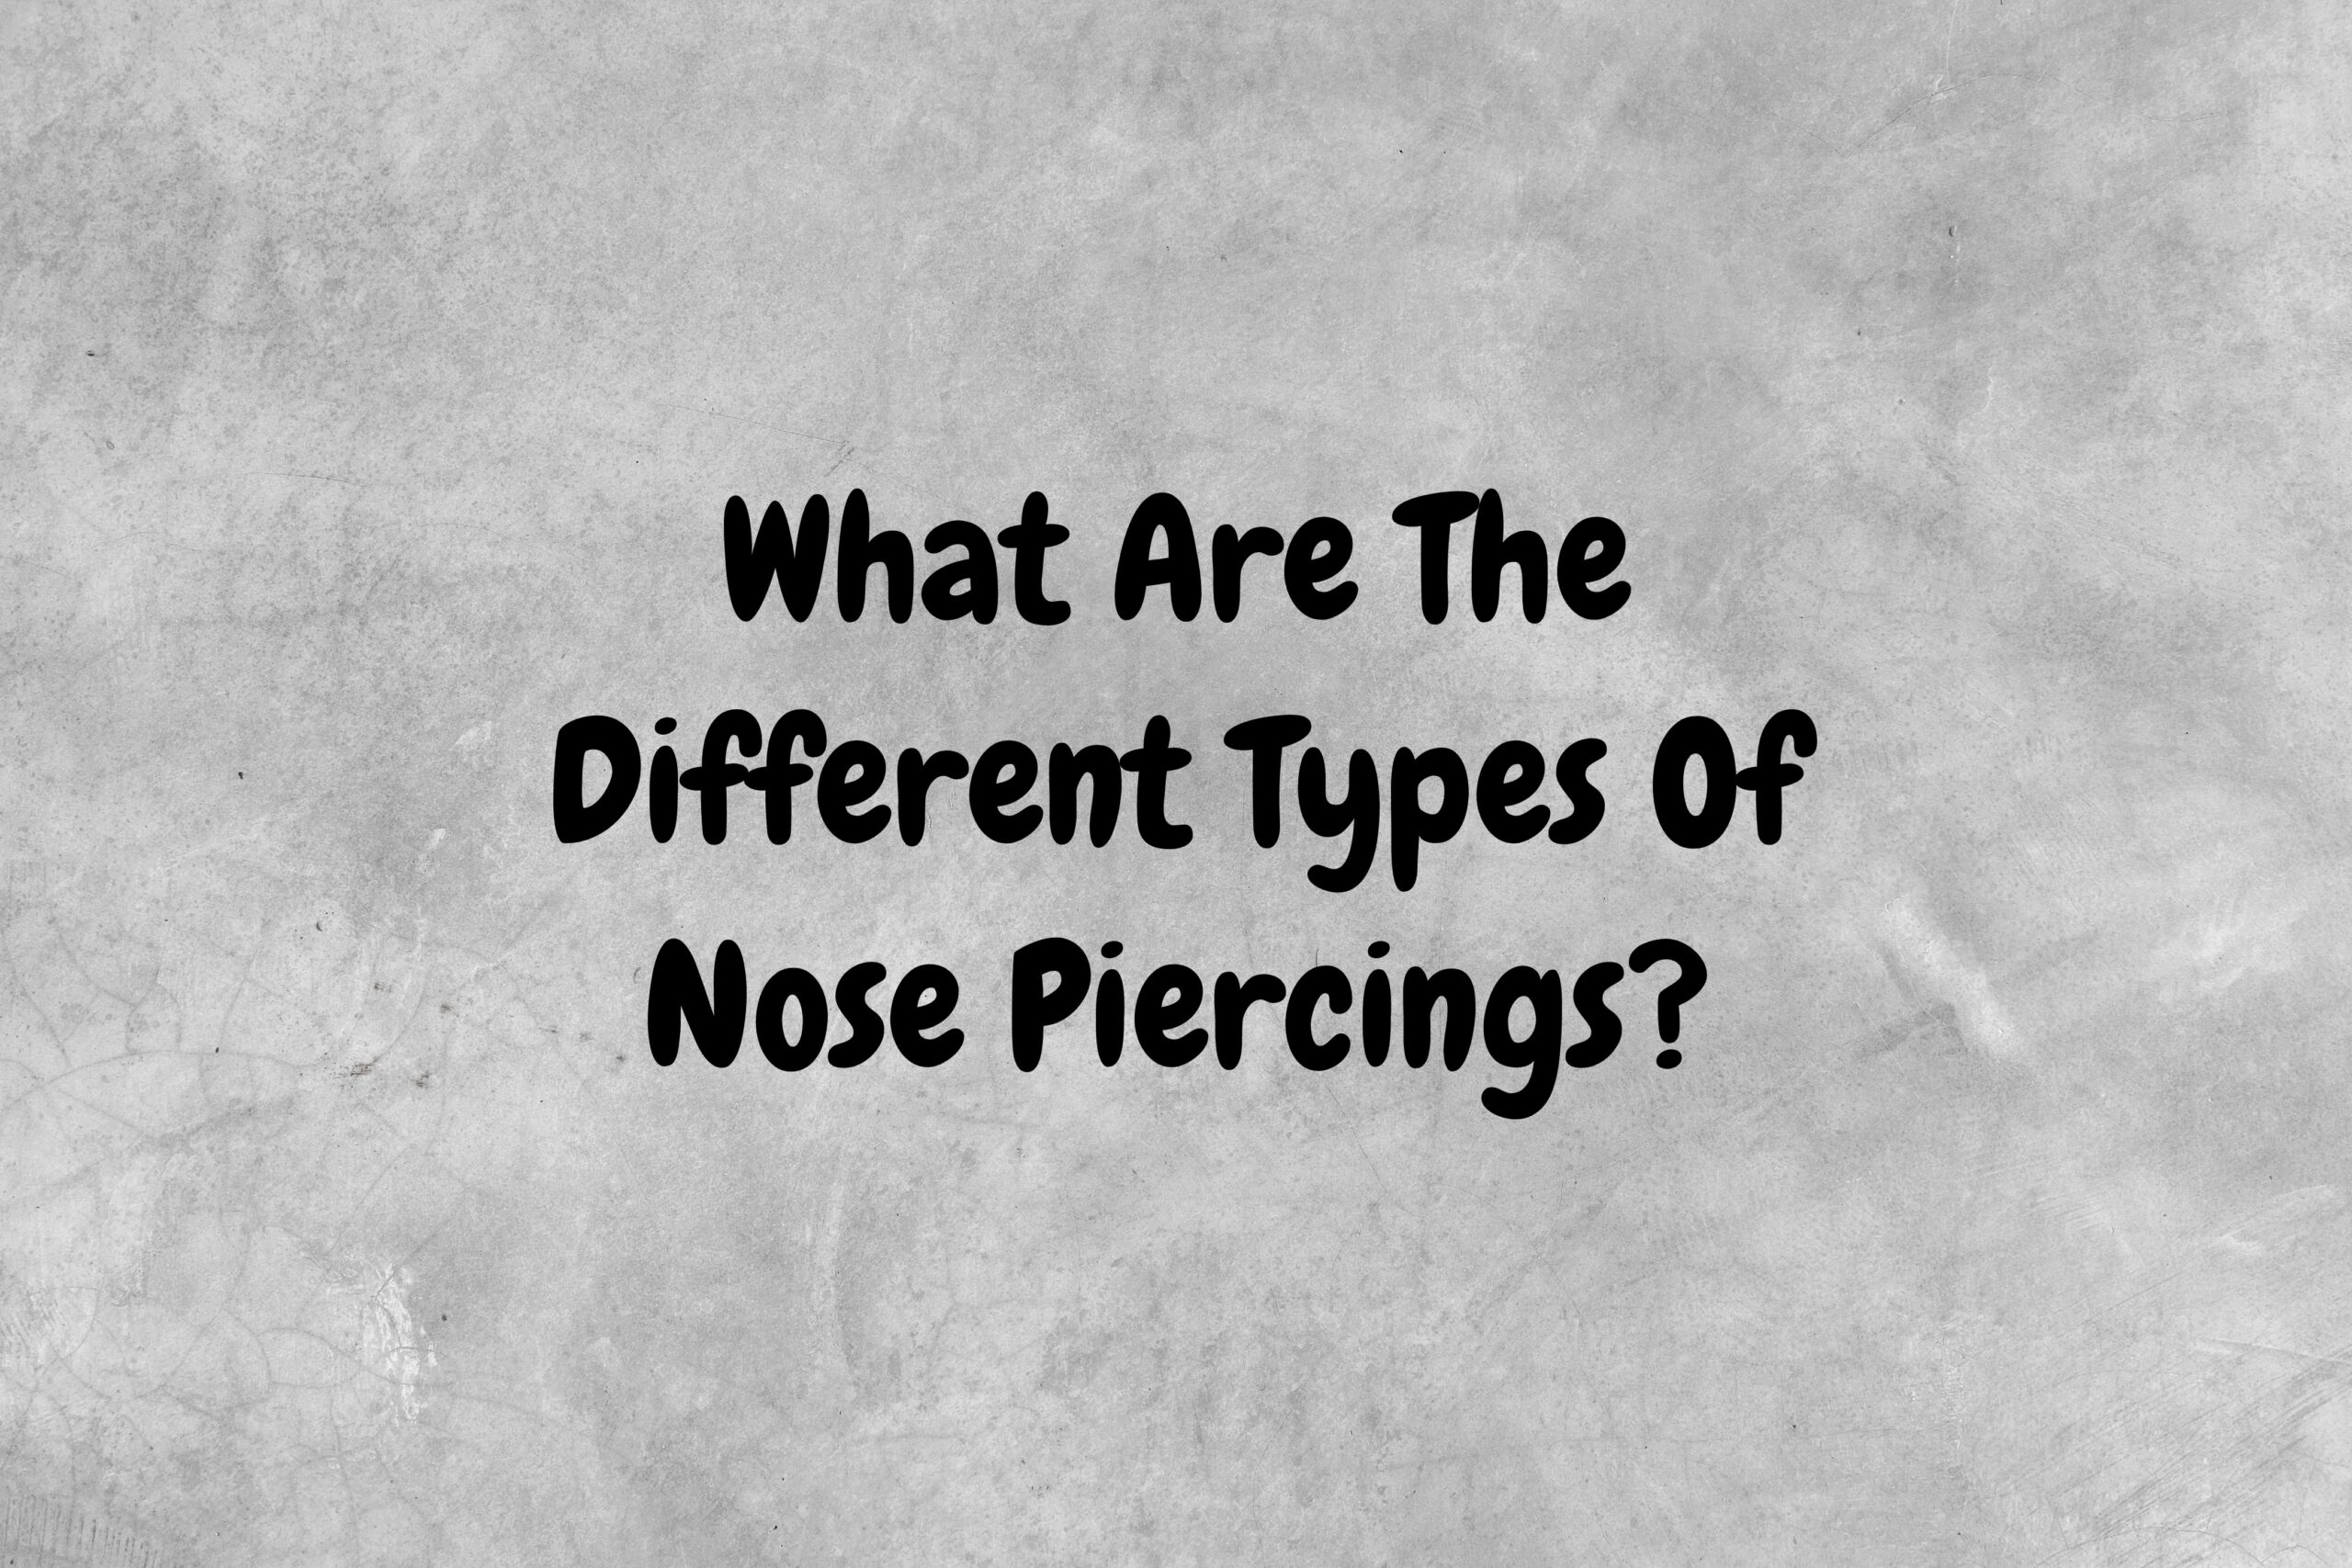 An image with a gray background and text that asks the question "What are the different types of nose piercings?"